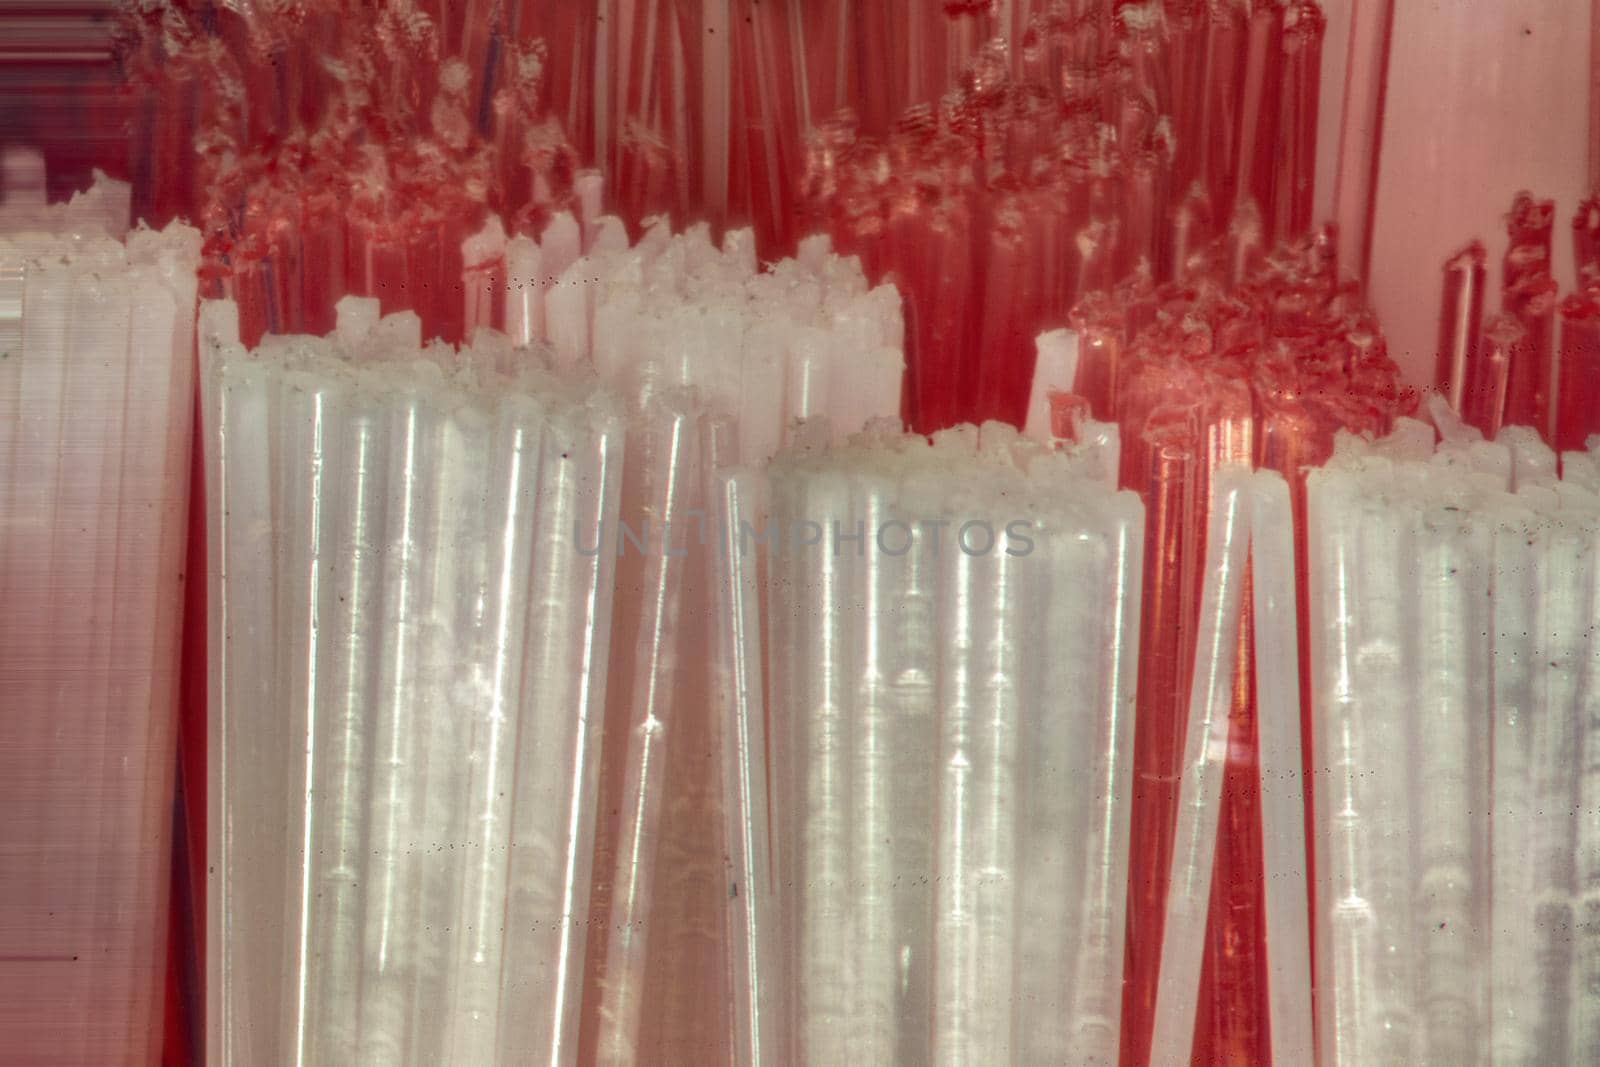 red white round bristles of a toothbrush